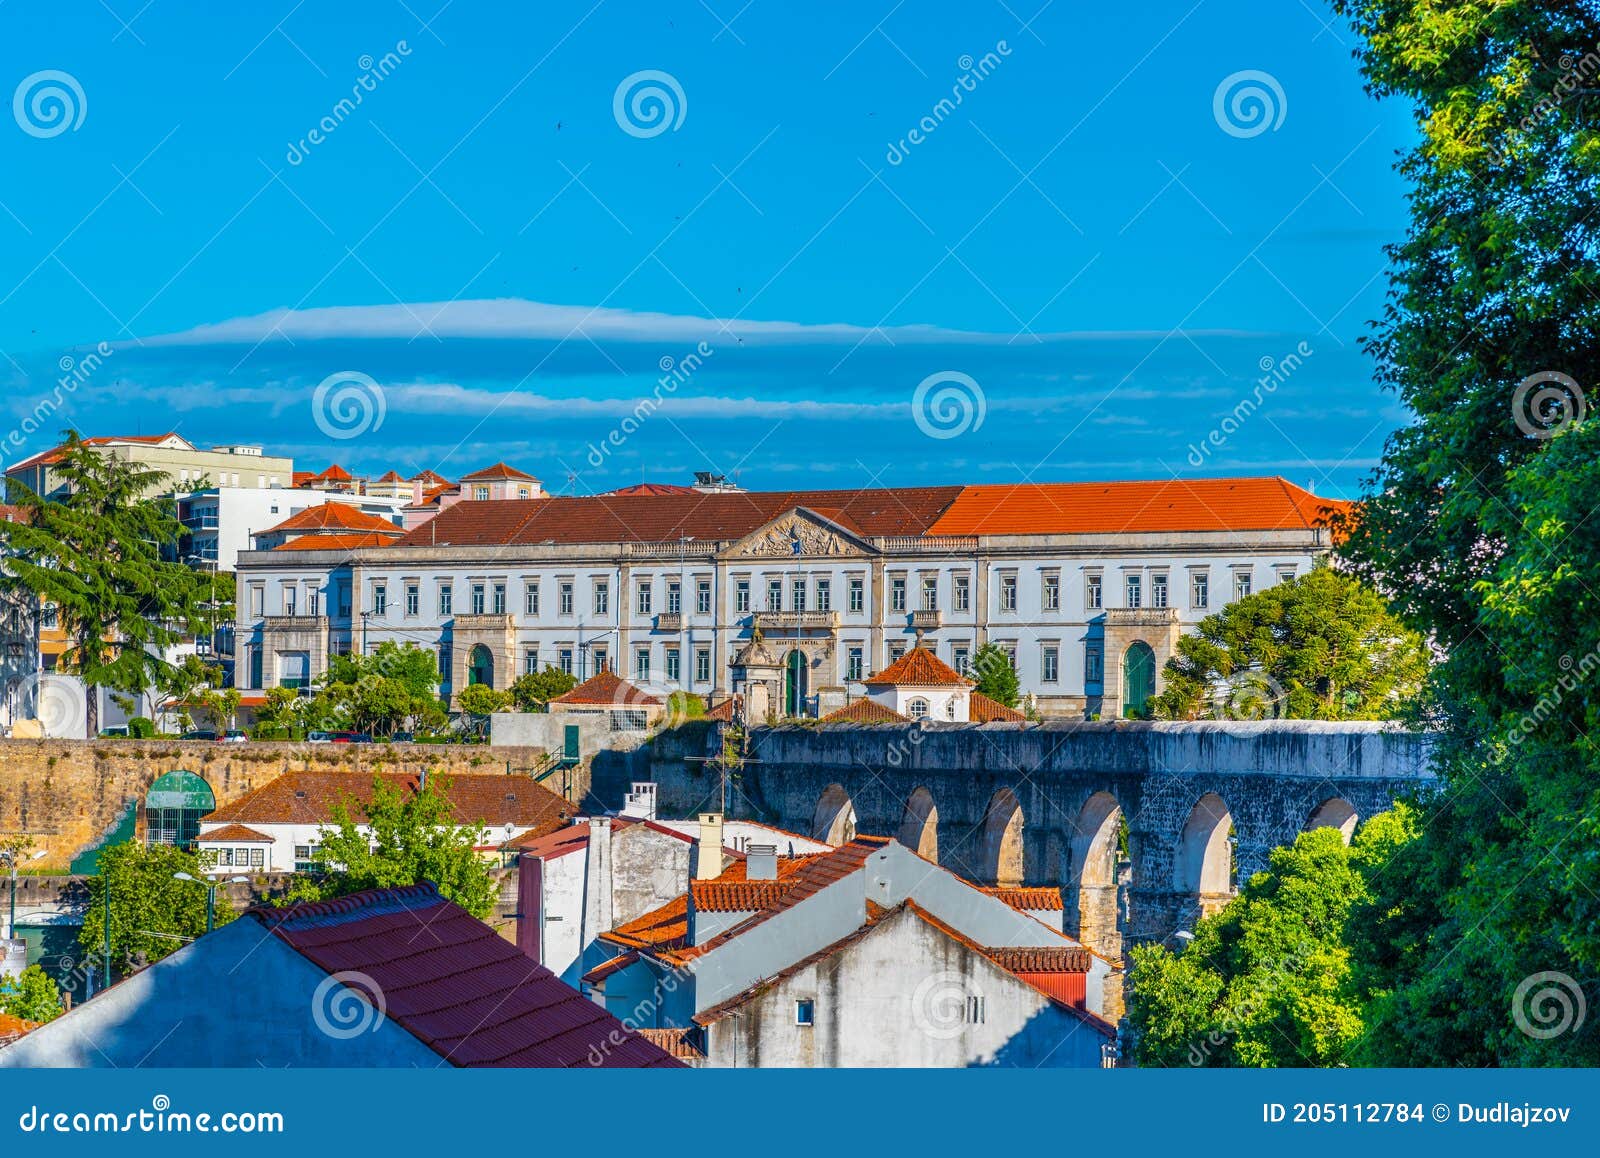 aerial view of coimbra dominated by a military building, portugal